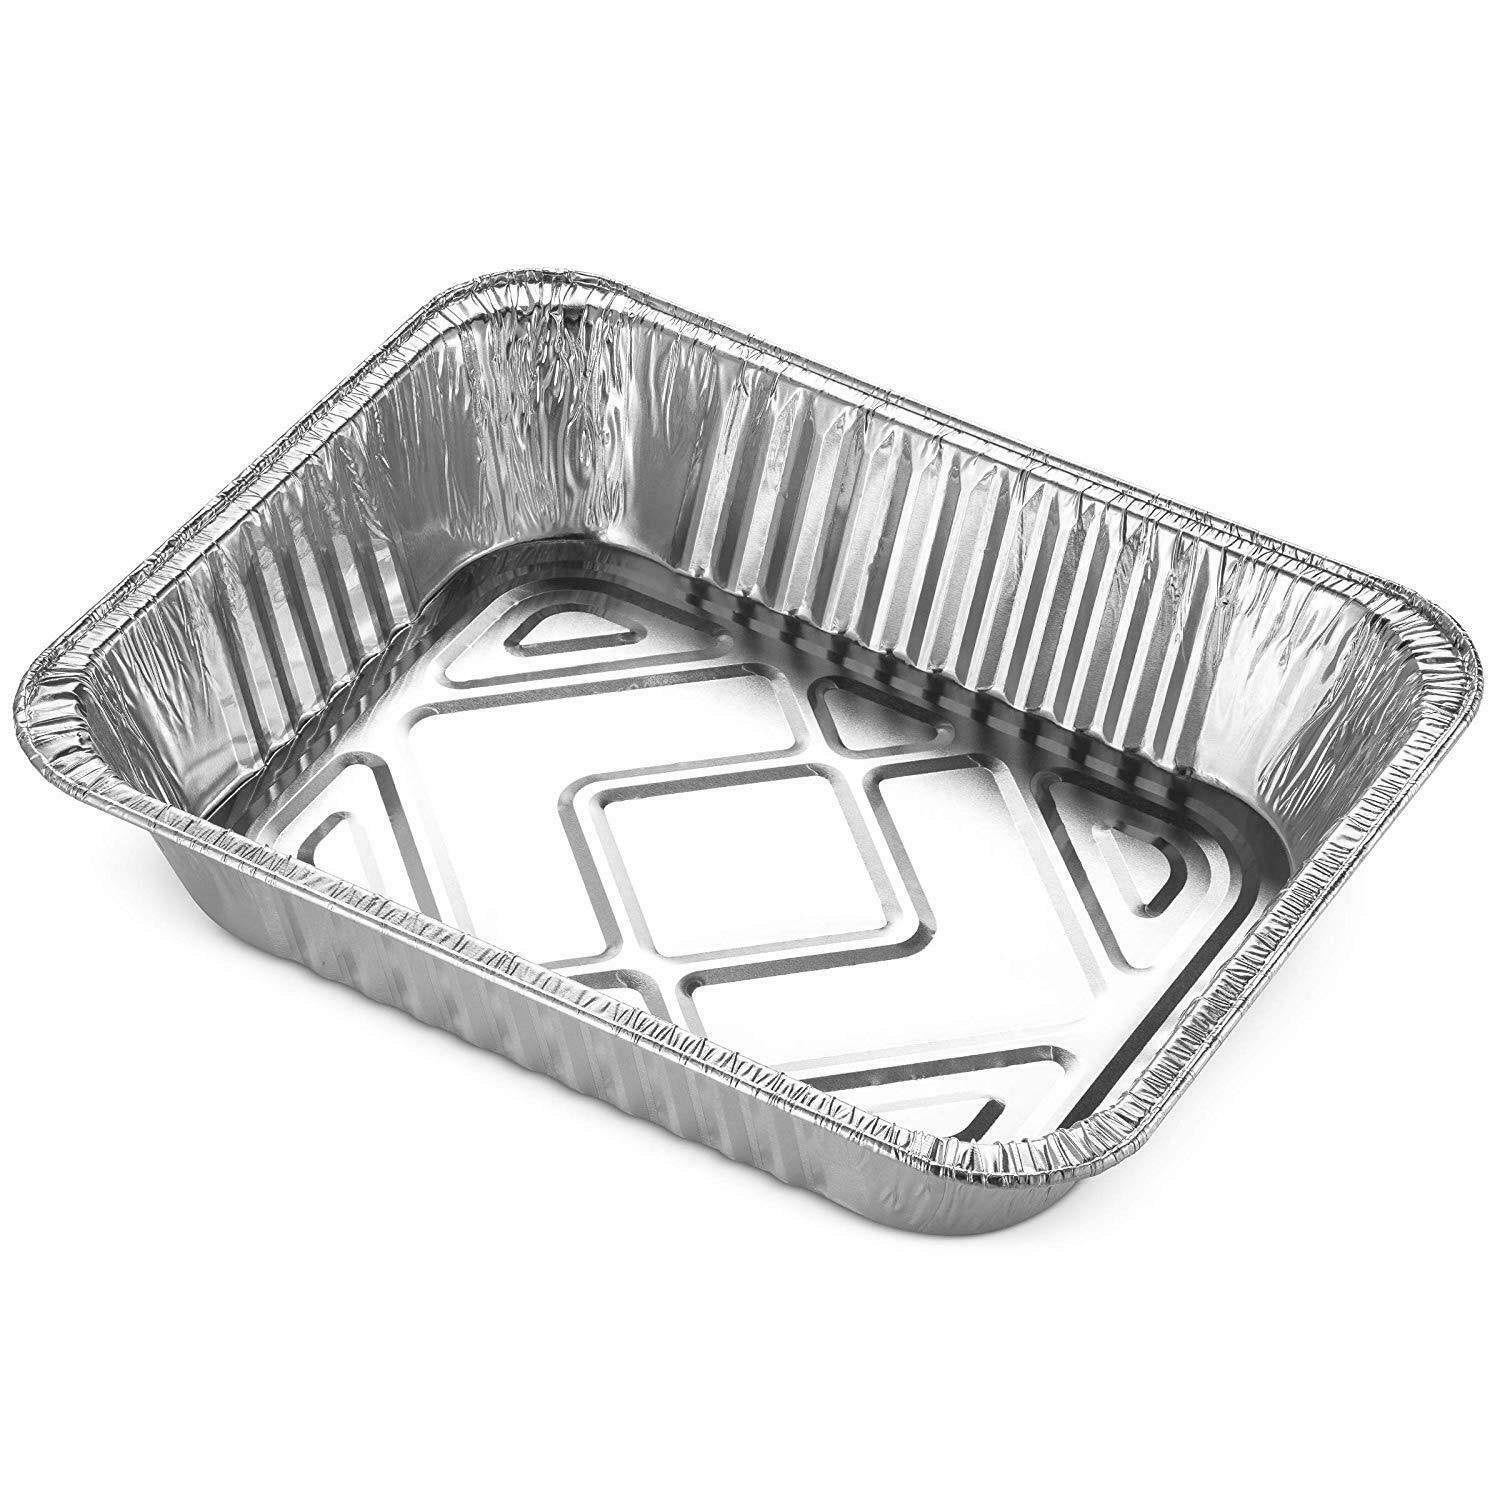 MontoPack Aluminum Foil Pans Half Size Roasting Chafing Pan | Bulk 30 Pack  of 9x13 Tins for Cooking, Baking & Catering | Heavy Duty Disposable